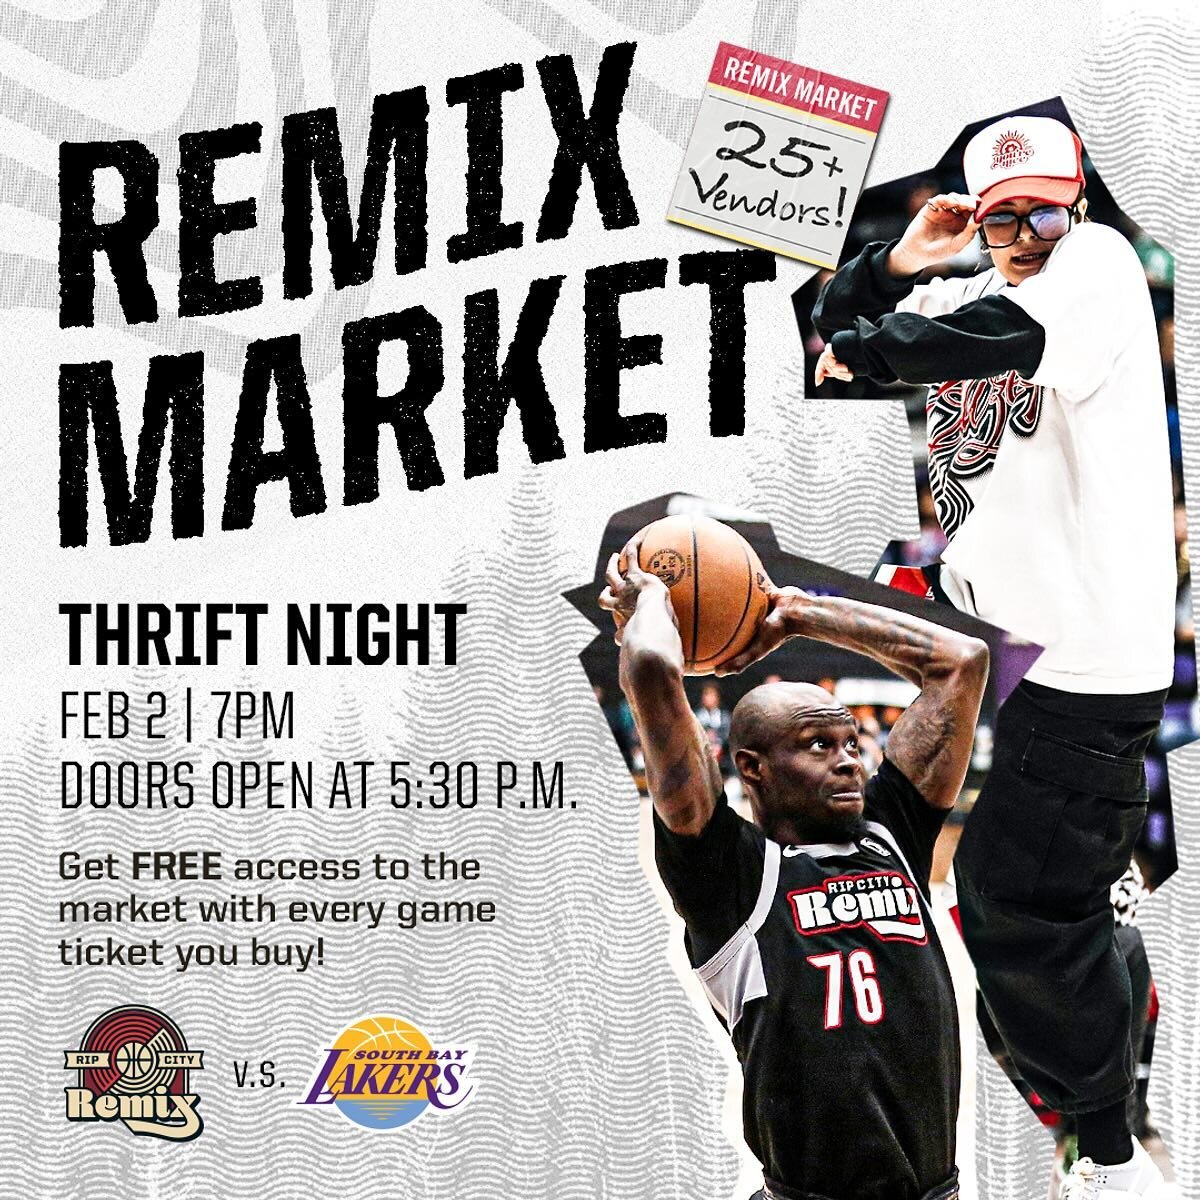 The Rip City Remix of the NBA G League recently hosted a Thrift Night theme night as a creative way to reach and engage next gen and casual fan audiences, drive earned media and integrate local businesses.